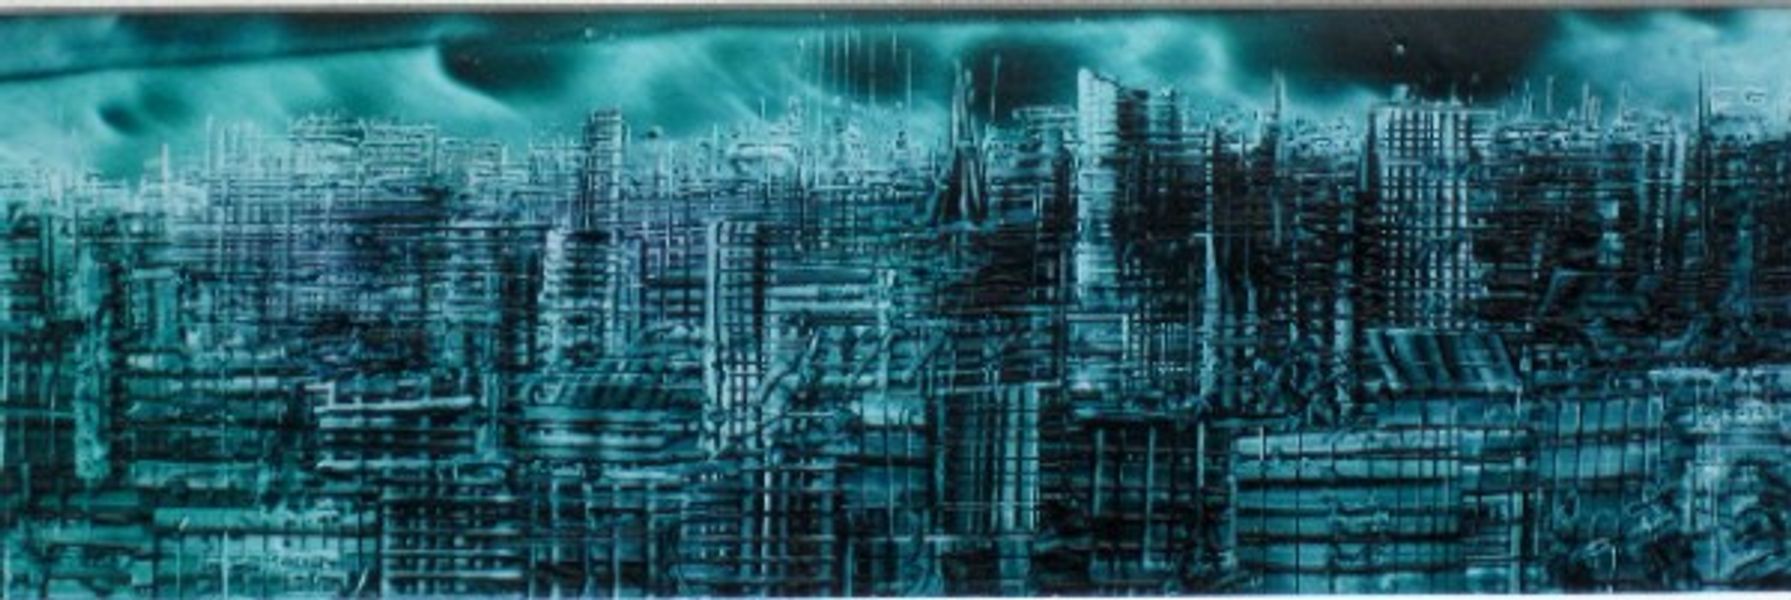 Blue green city by Phil Madley